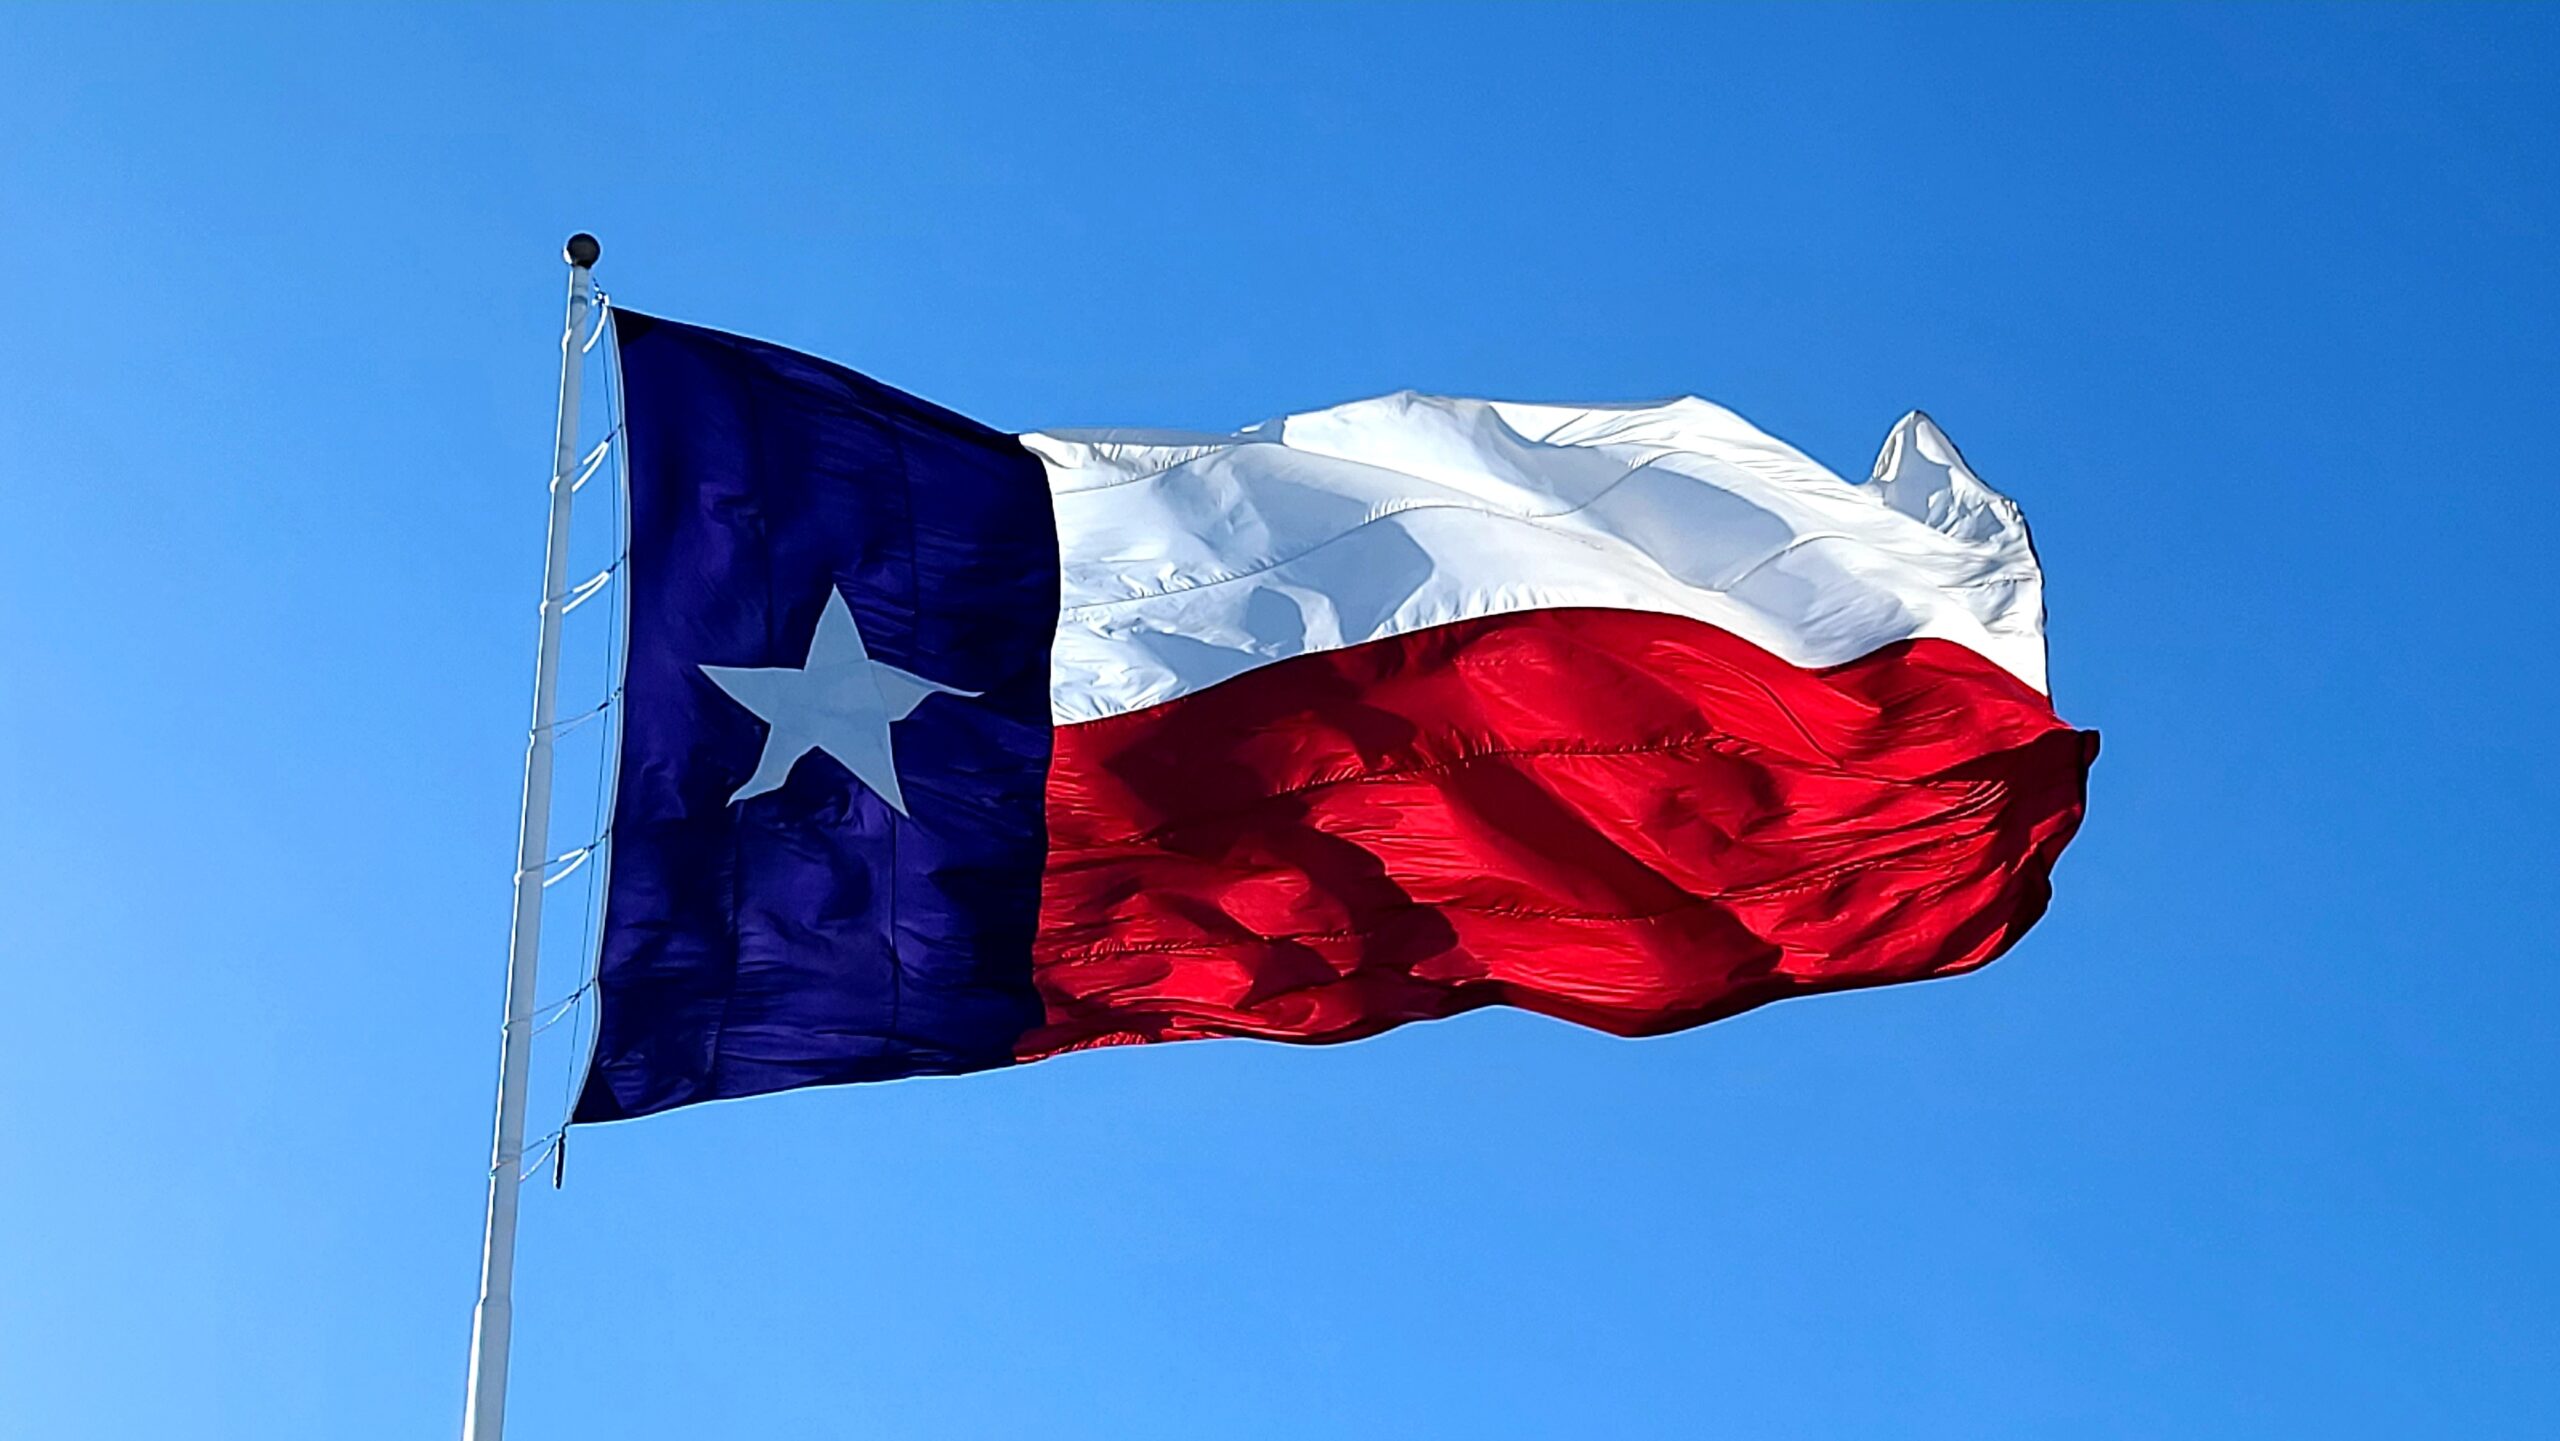 The Texas flag on a clear, windy day